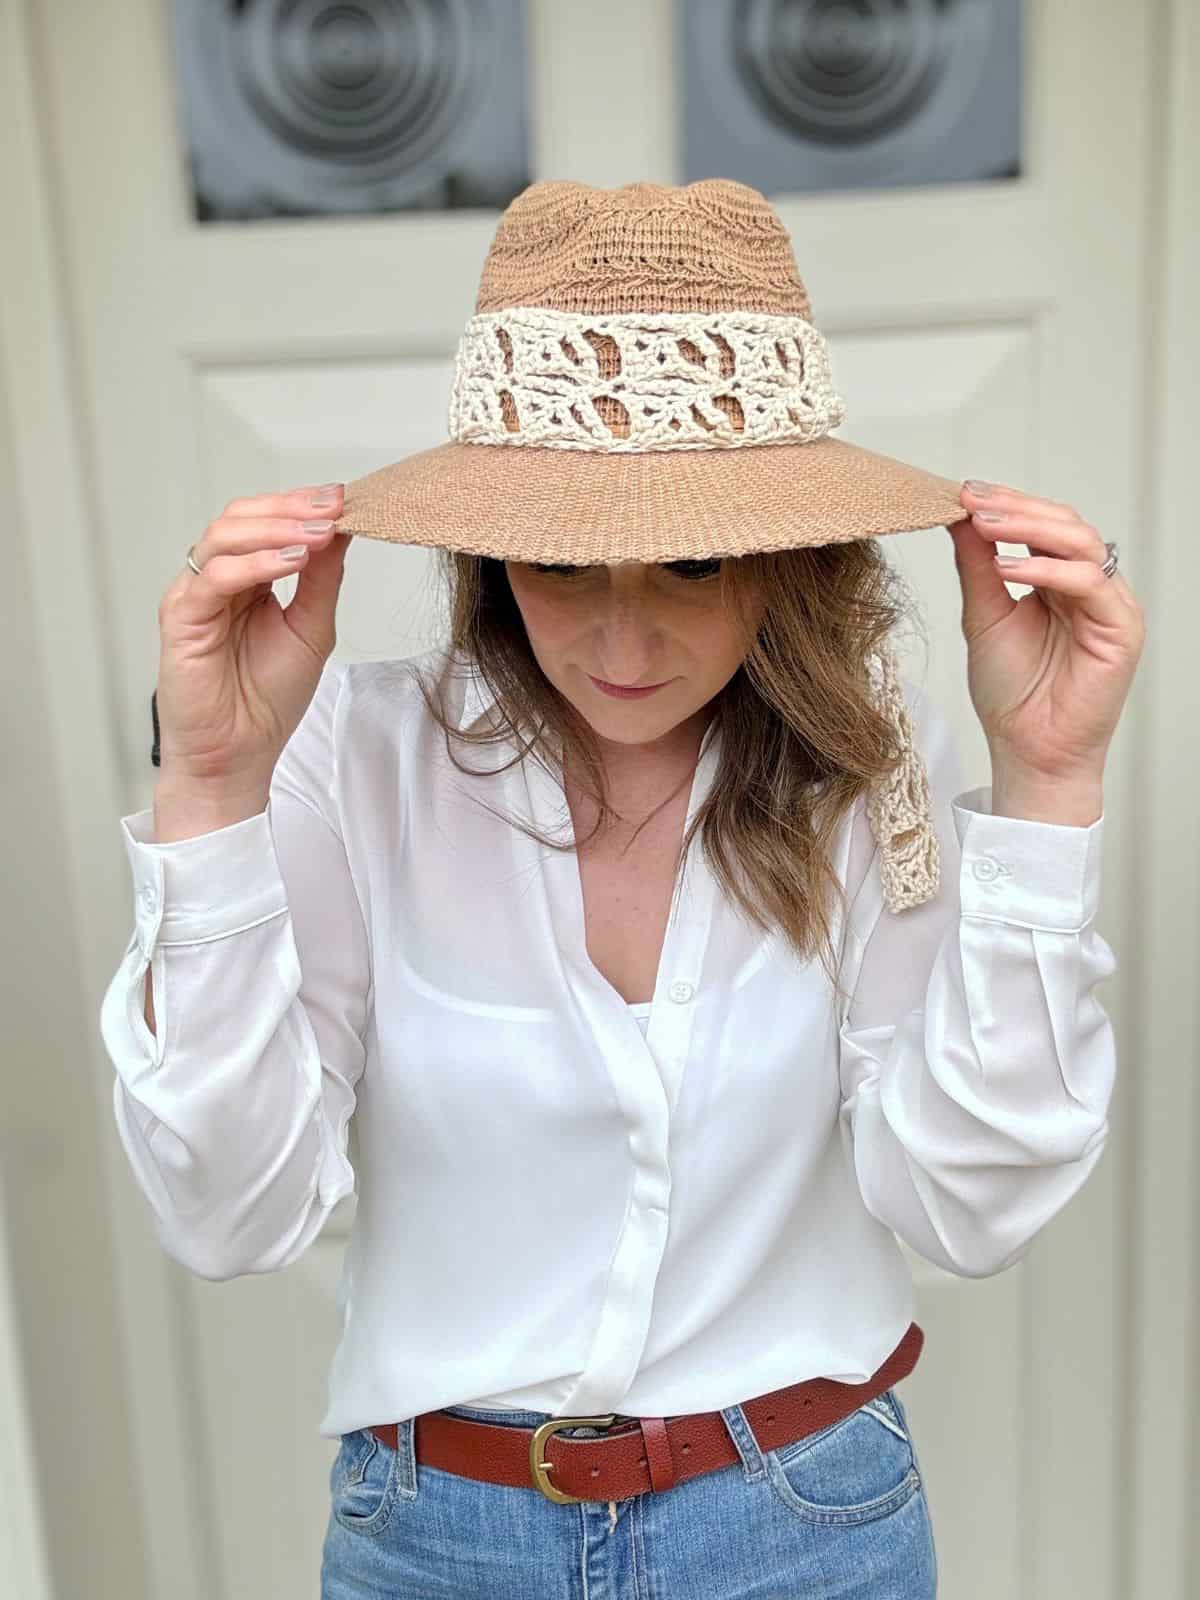 A person wearing a white blouse and jeans adjusts their beige hat with lace decorations in front of a white door.